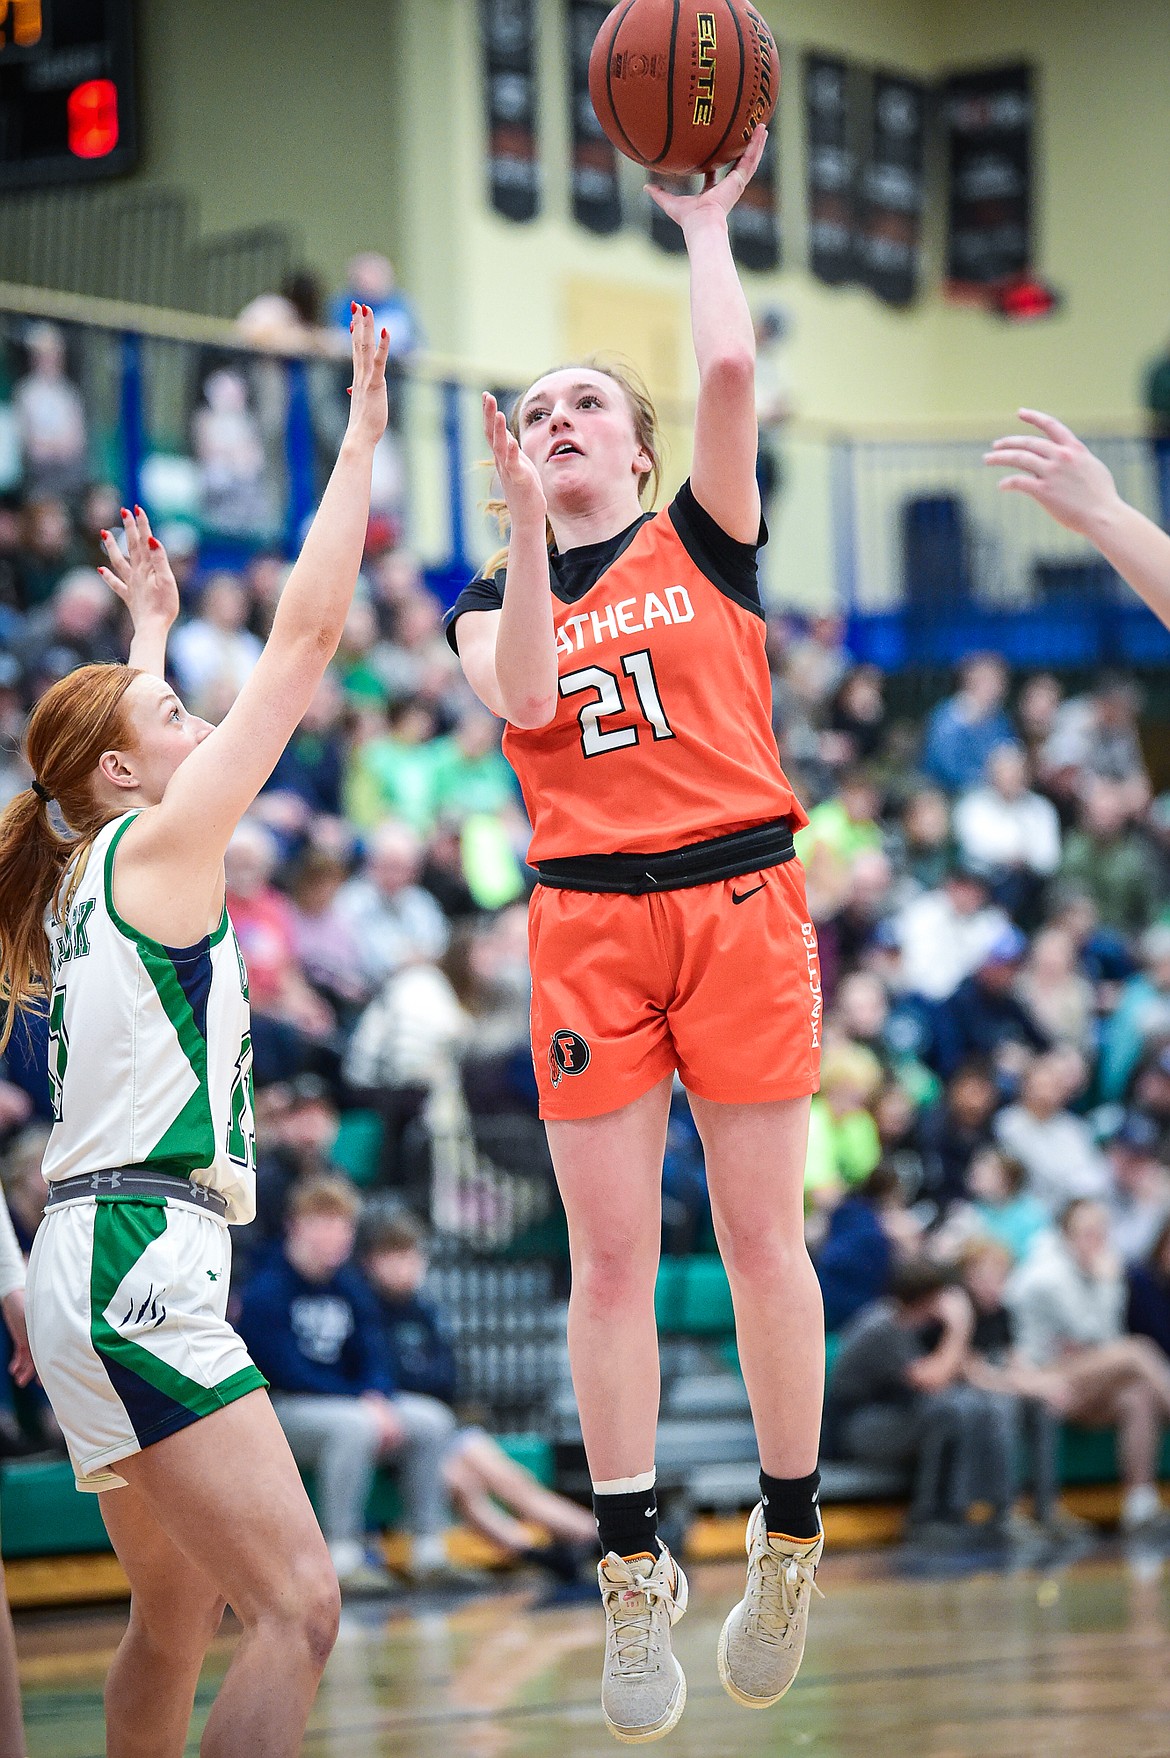 Flathead's Harlie Roth (21) drives to the basket in the second half against Glacier at Glacier High School on Thursday, Feb. 1. (Casey Kreider/Daily Inter Lake)